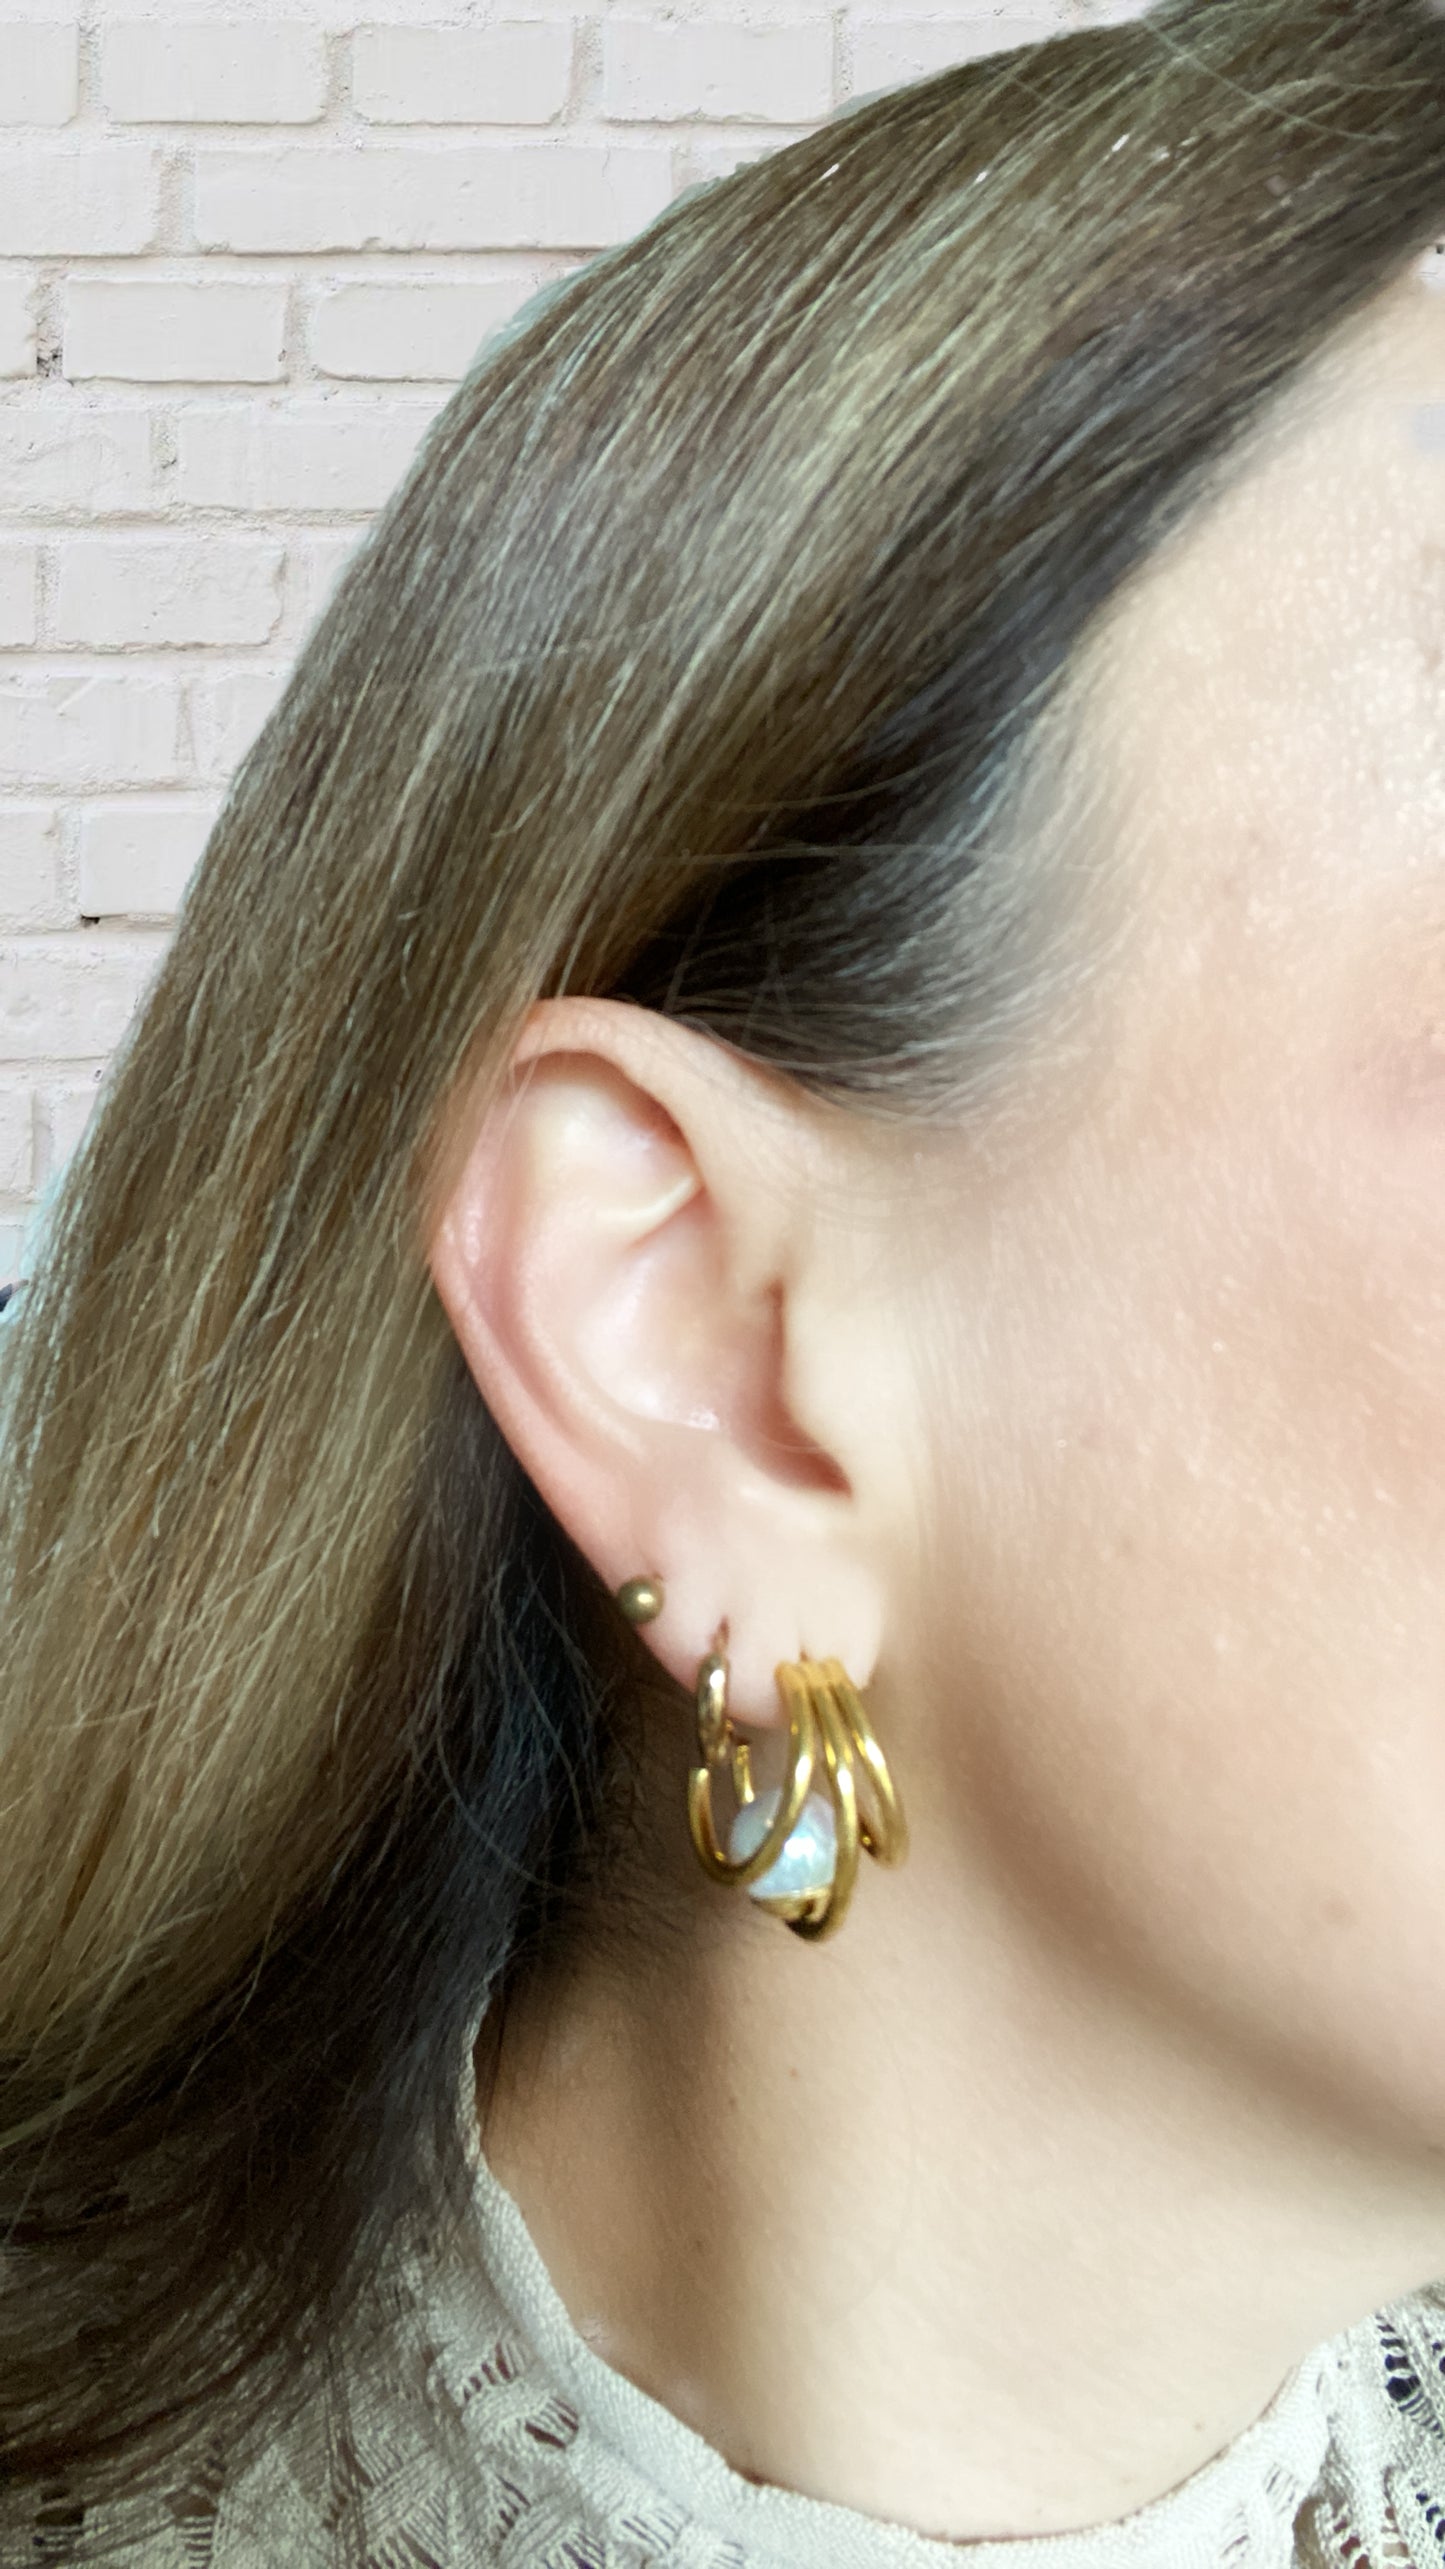 "TANIT" gold plated open hoop earrings with triple hoops and a pearl bead attached